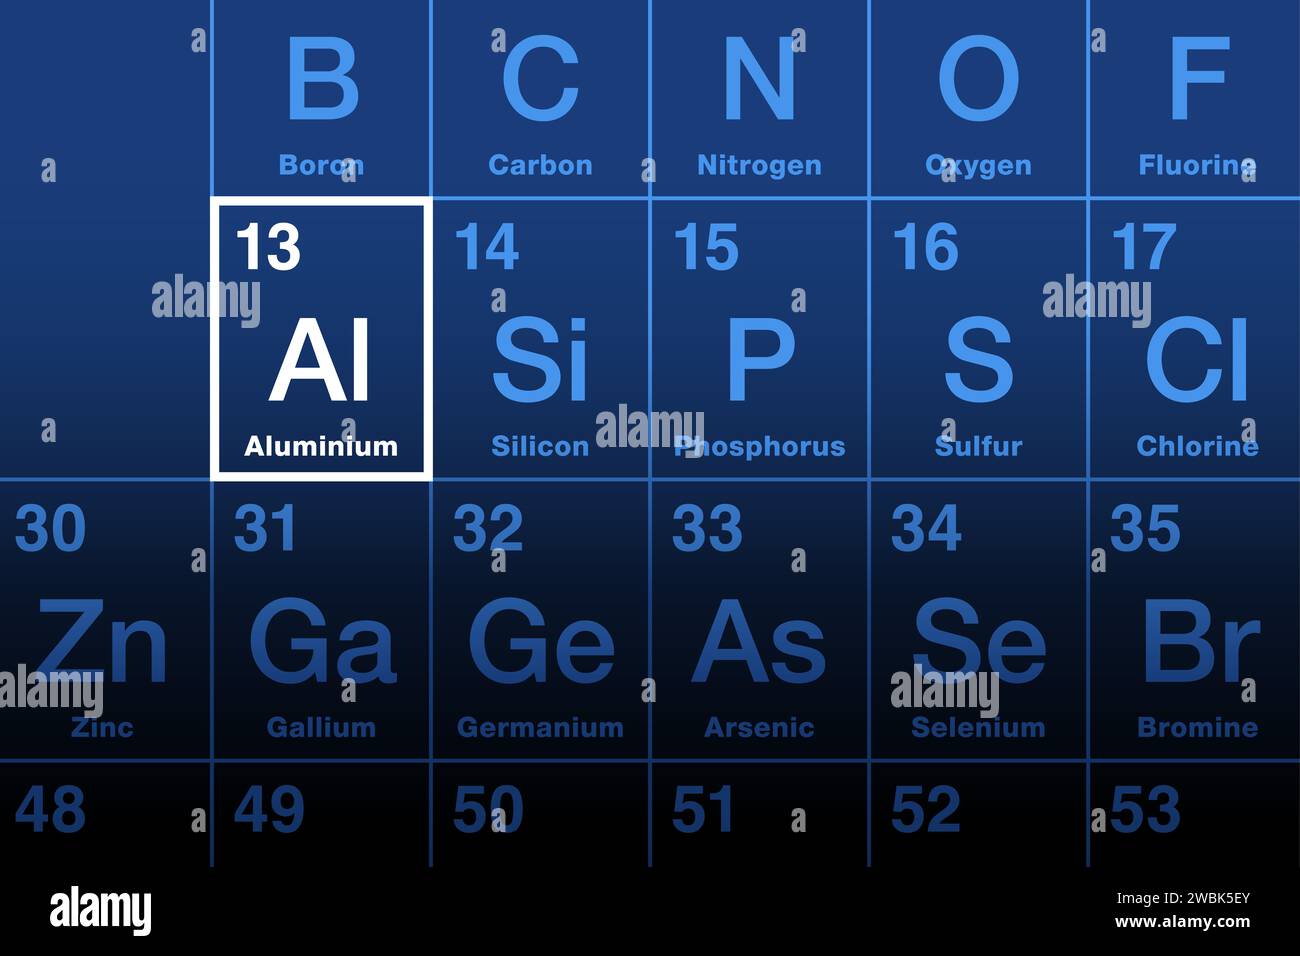 Aluminum element on the periodic table. Chemical element and metal with symbol Al and atomic number 13. Stock Photo